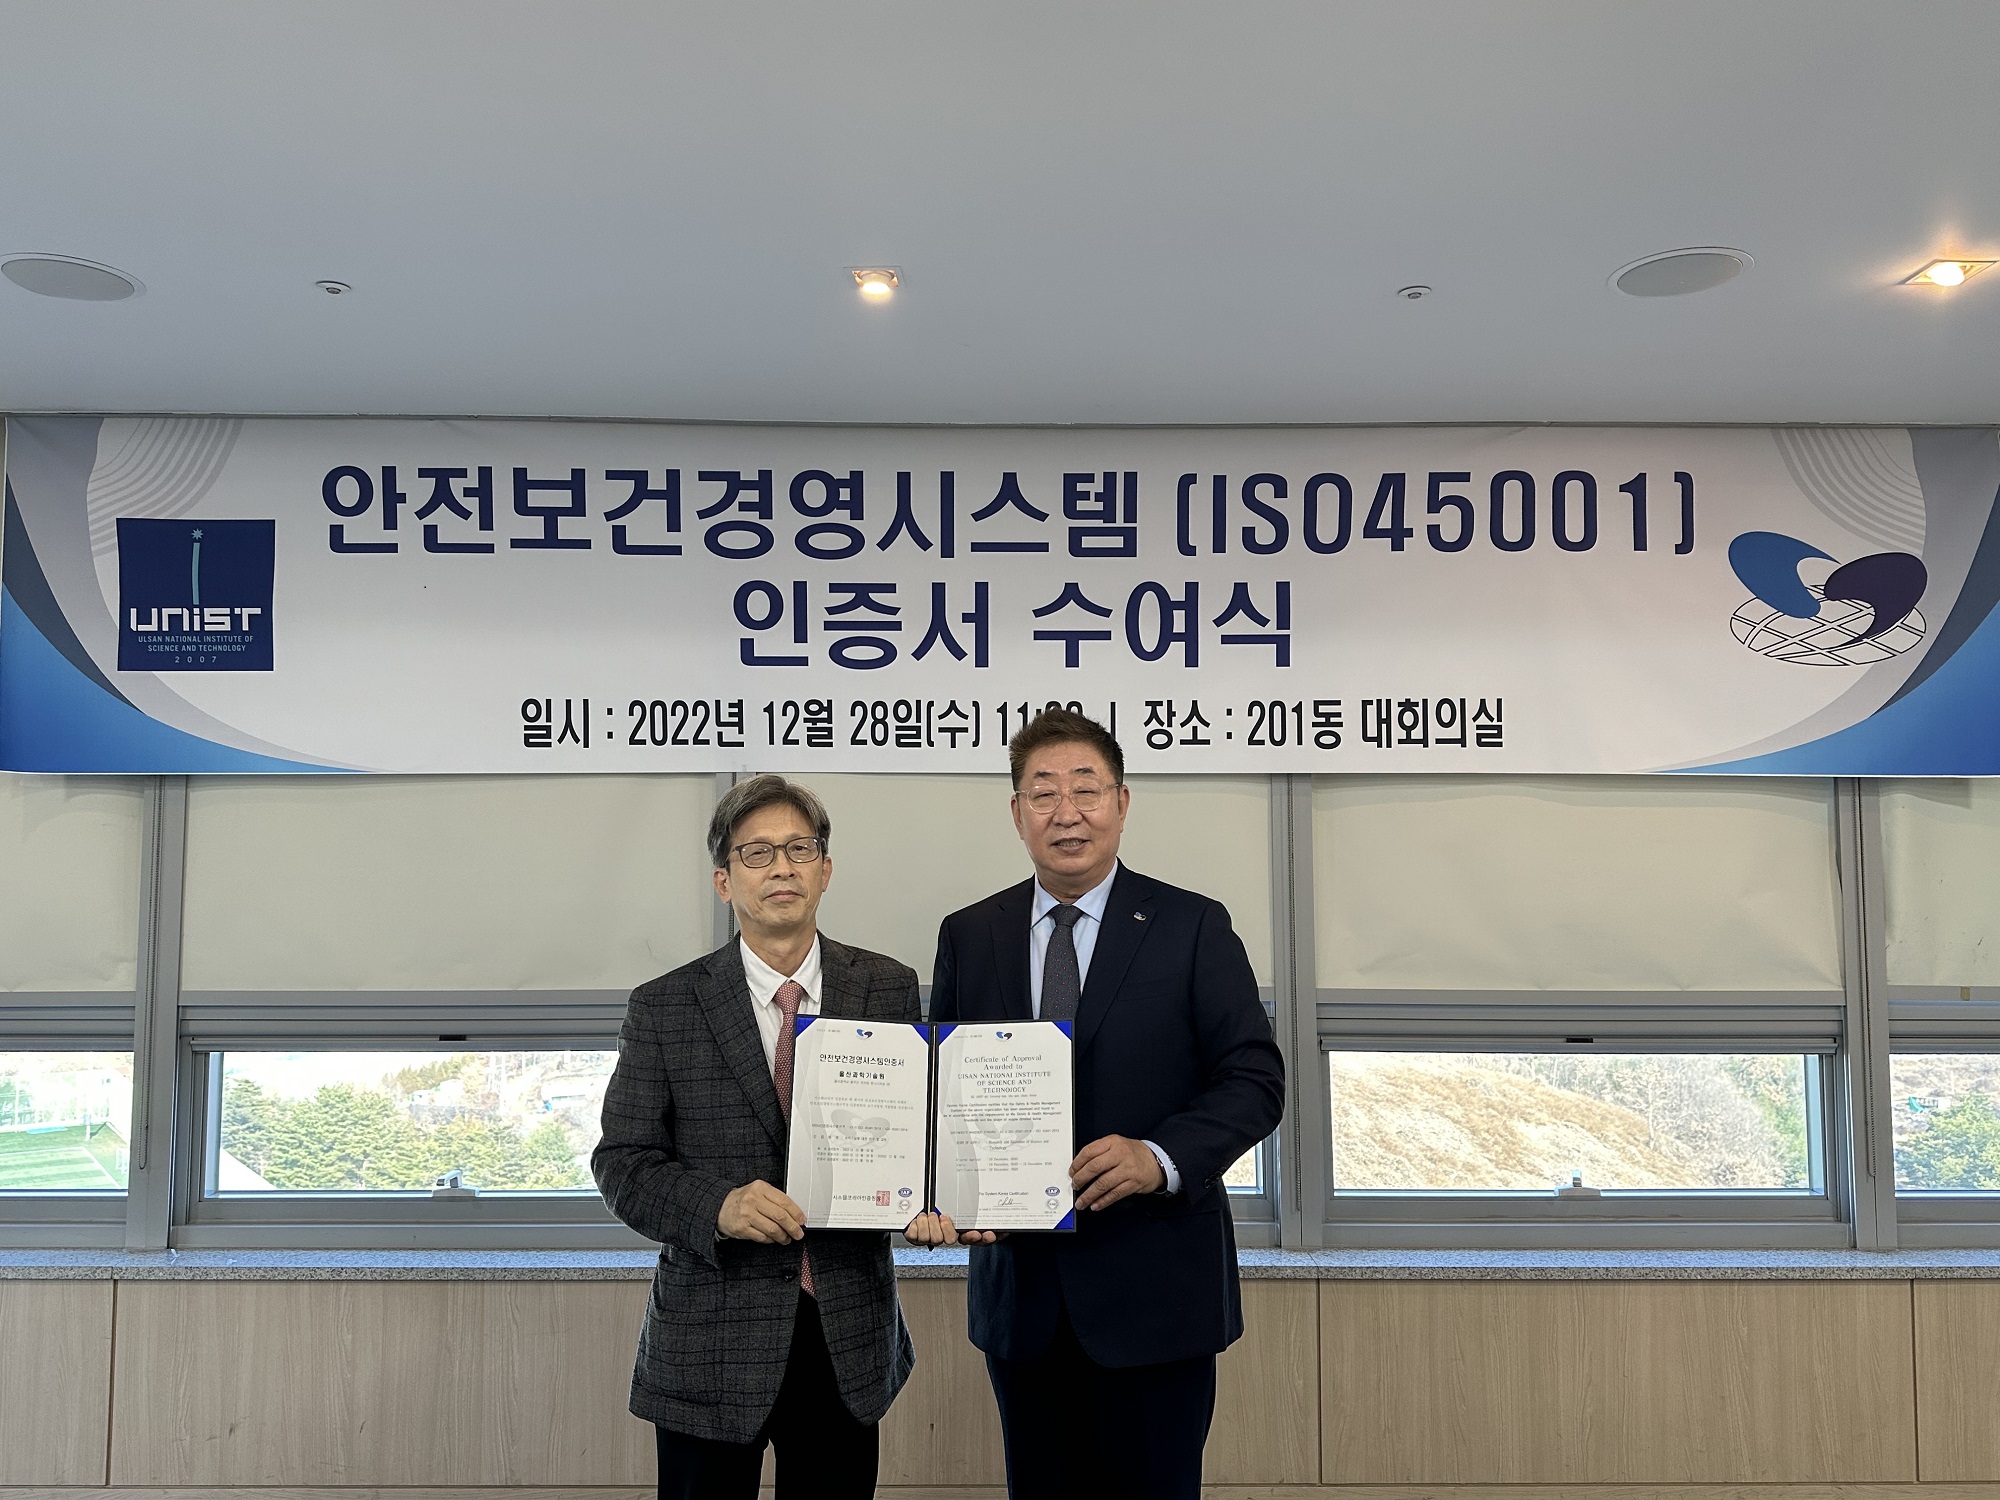 ISO 45001 certification ceremony took place in the Main Administration Building of UNIST on December 28, 2022. 